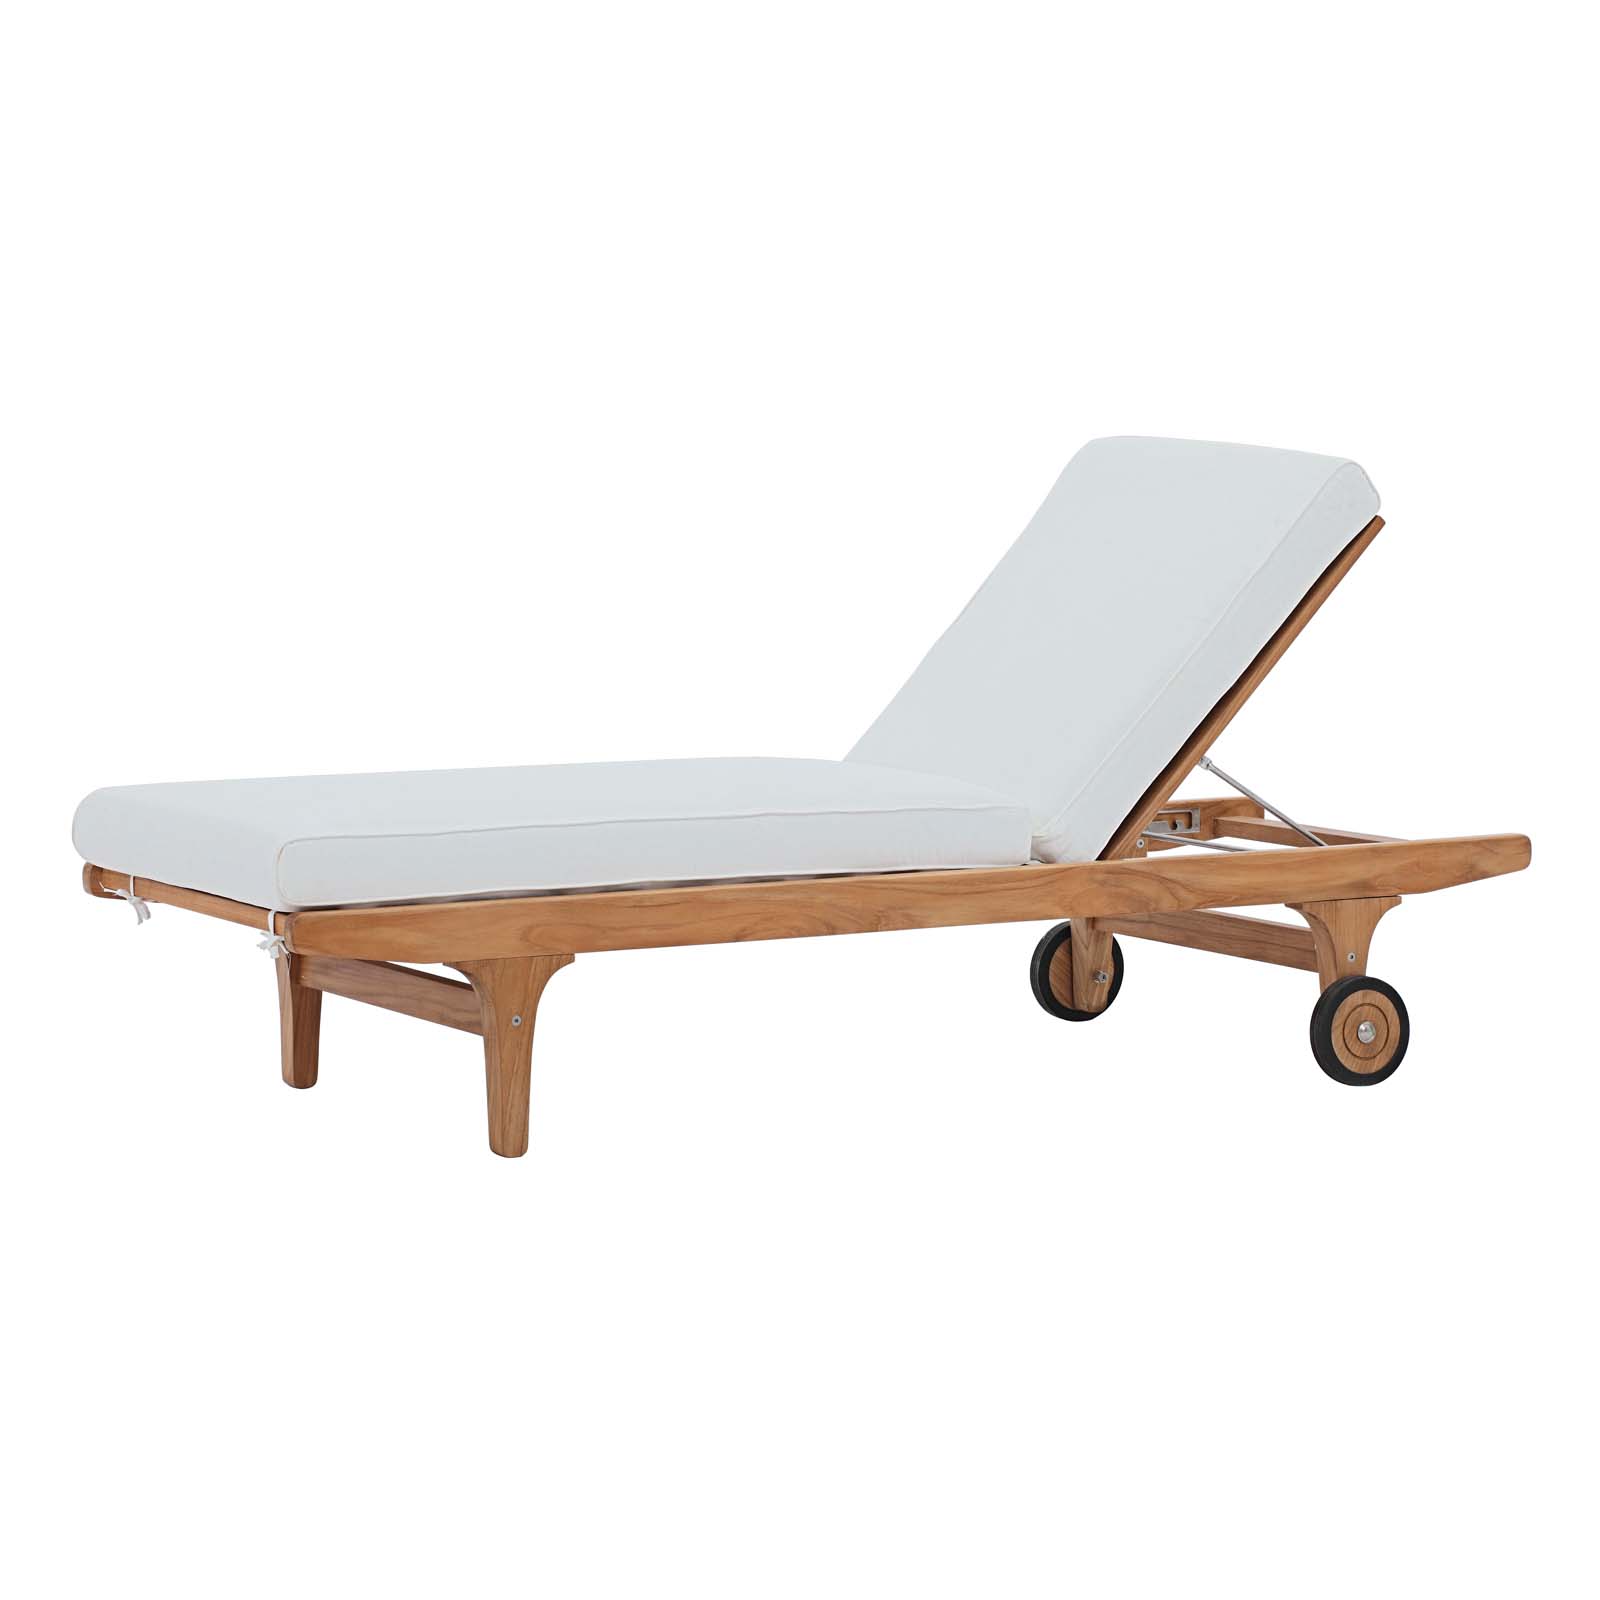 Modern Contemporary Urban Design Outdoor Patio Balcony Garden Furniture Lounge Chair Chaise, Wood, White Natural - image 1 of 9